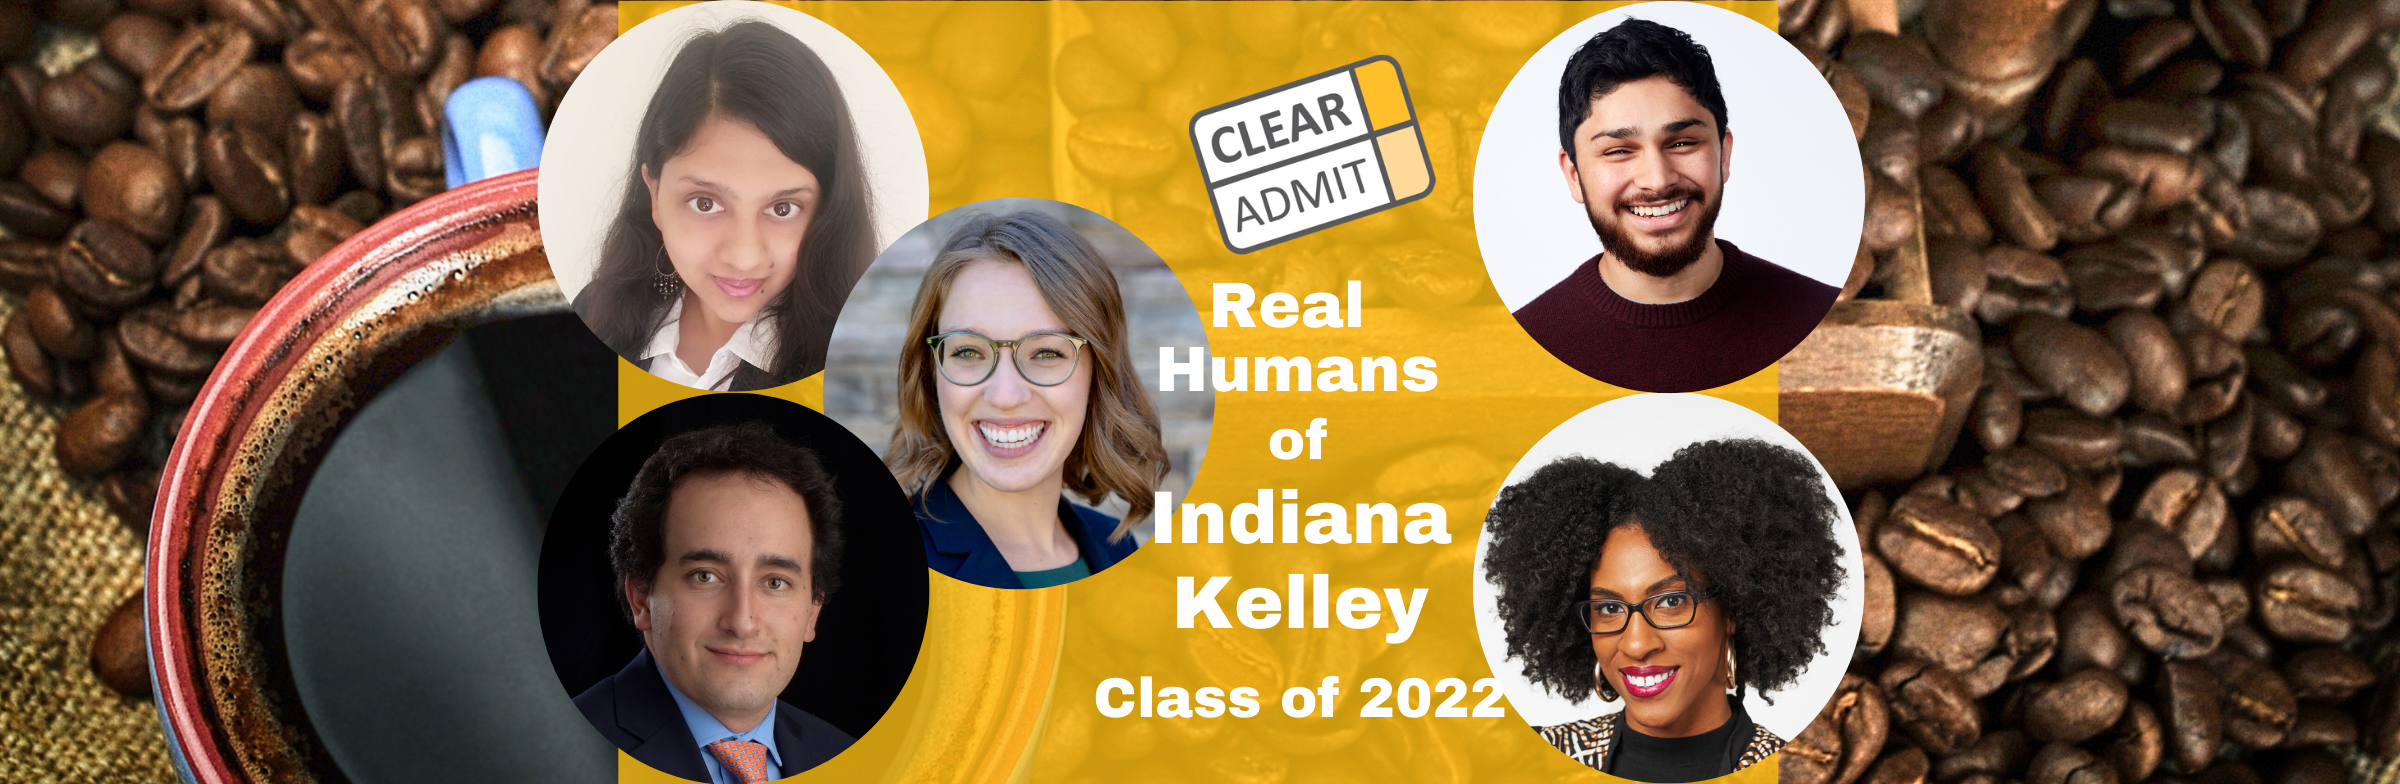 Image for Real Humans of Indiana Kelley’s MBA Class of 2022